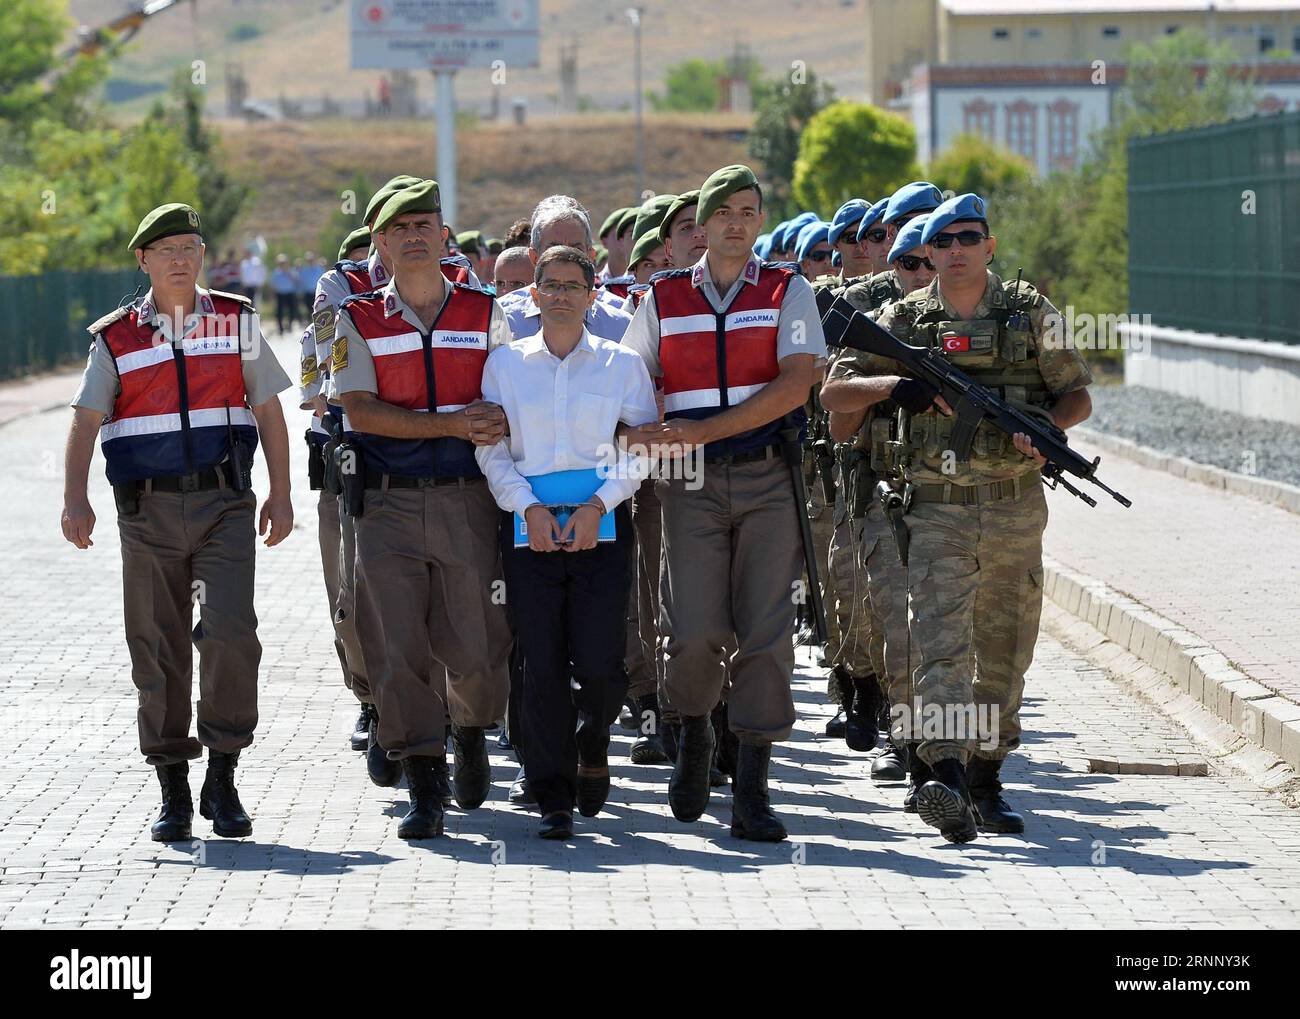 Themen der Woche Bilder des Tages (170801) -- ANKARA, Aug. 1, 2017 -- Defendants escorted by gendarmerie arrive at the court for their trial in Sincan district, Ankara, capital of Turkey, on Aug. 1, 2017. A key trial over Turkey s coup attempt last year started under heavy security measures in Ankara on Tuesday, with 486 suspects accused of masterminding the coup facing justice. )(rh) TURKEY-ANKARA-COUP-SUSPECTS-TRIAL MustafaxKaya PUBLICATIONxNOTxINxCHN   Topics the Week Images the Day  Ankara Aug 1 2017 defendants Escorted by Gendarmerie Arrive AT The Court for their Trial in  District Ankara Stock Photo